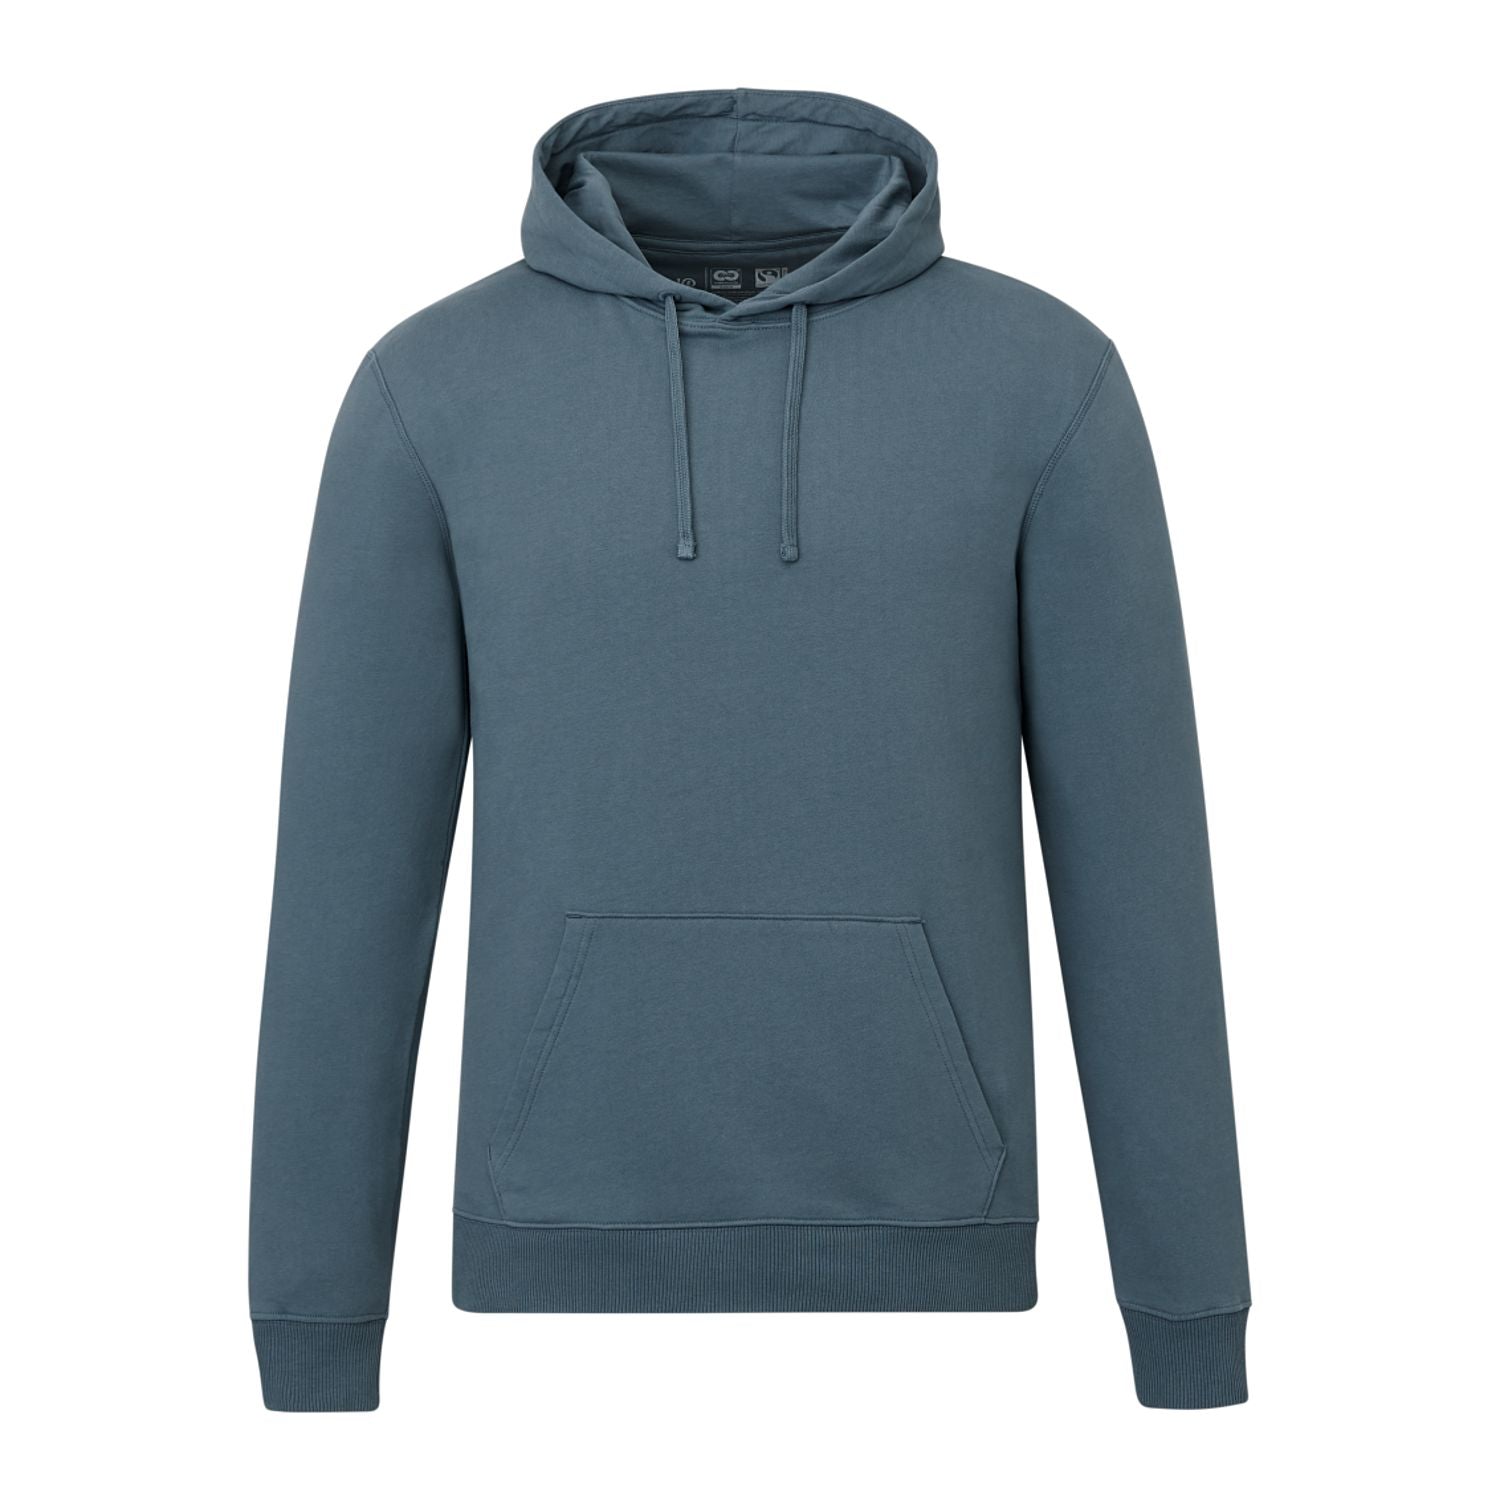 Customizable Tentree men's organic cotton french terry classic hoodie in vintage blue.